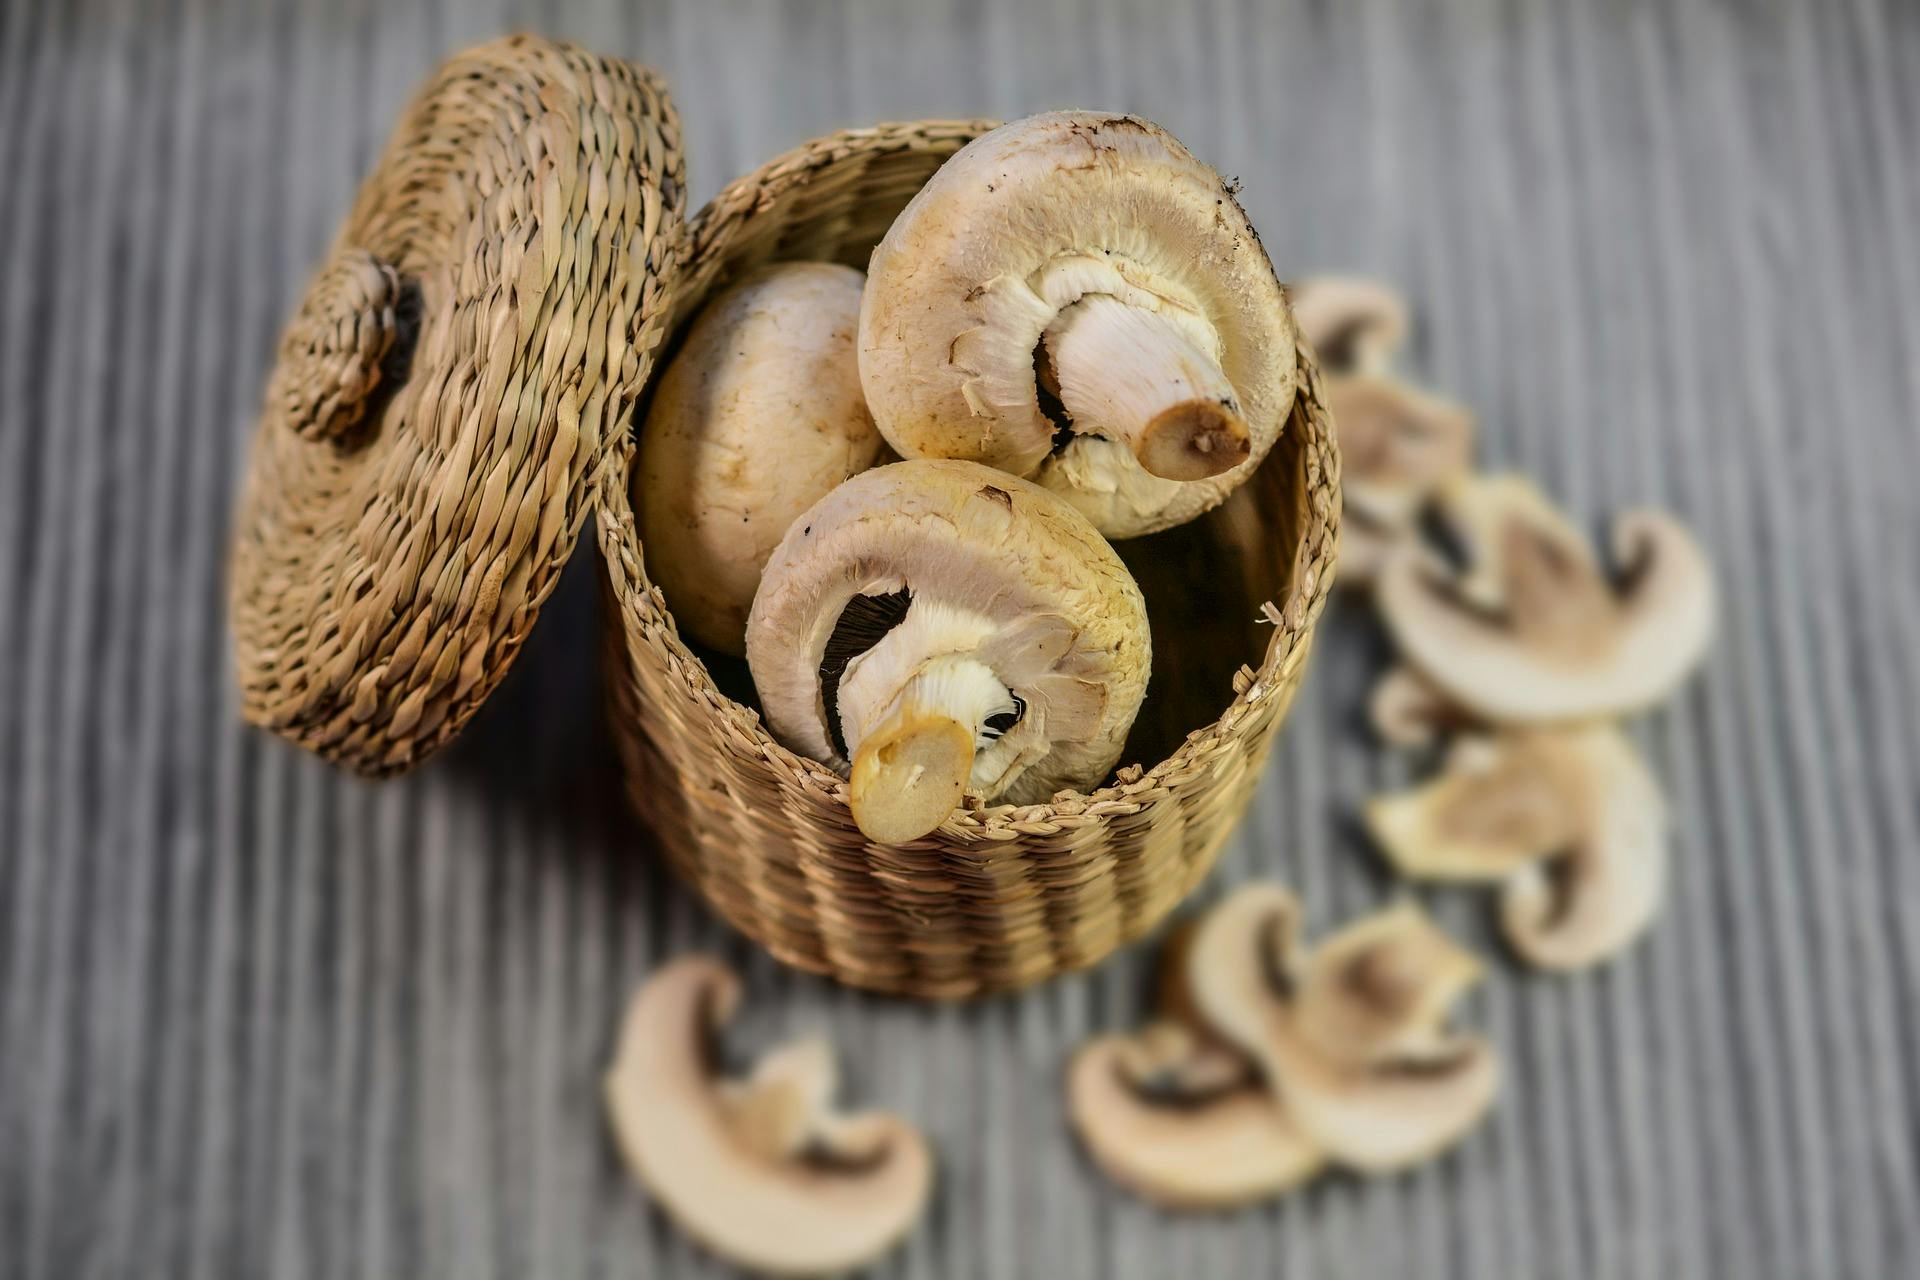 From Spores to Stores: Your Comprehensive Guide on Where to Buy Mushrooms